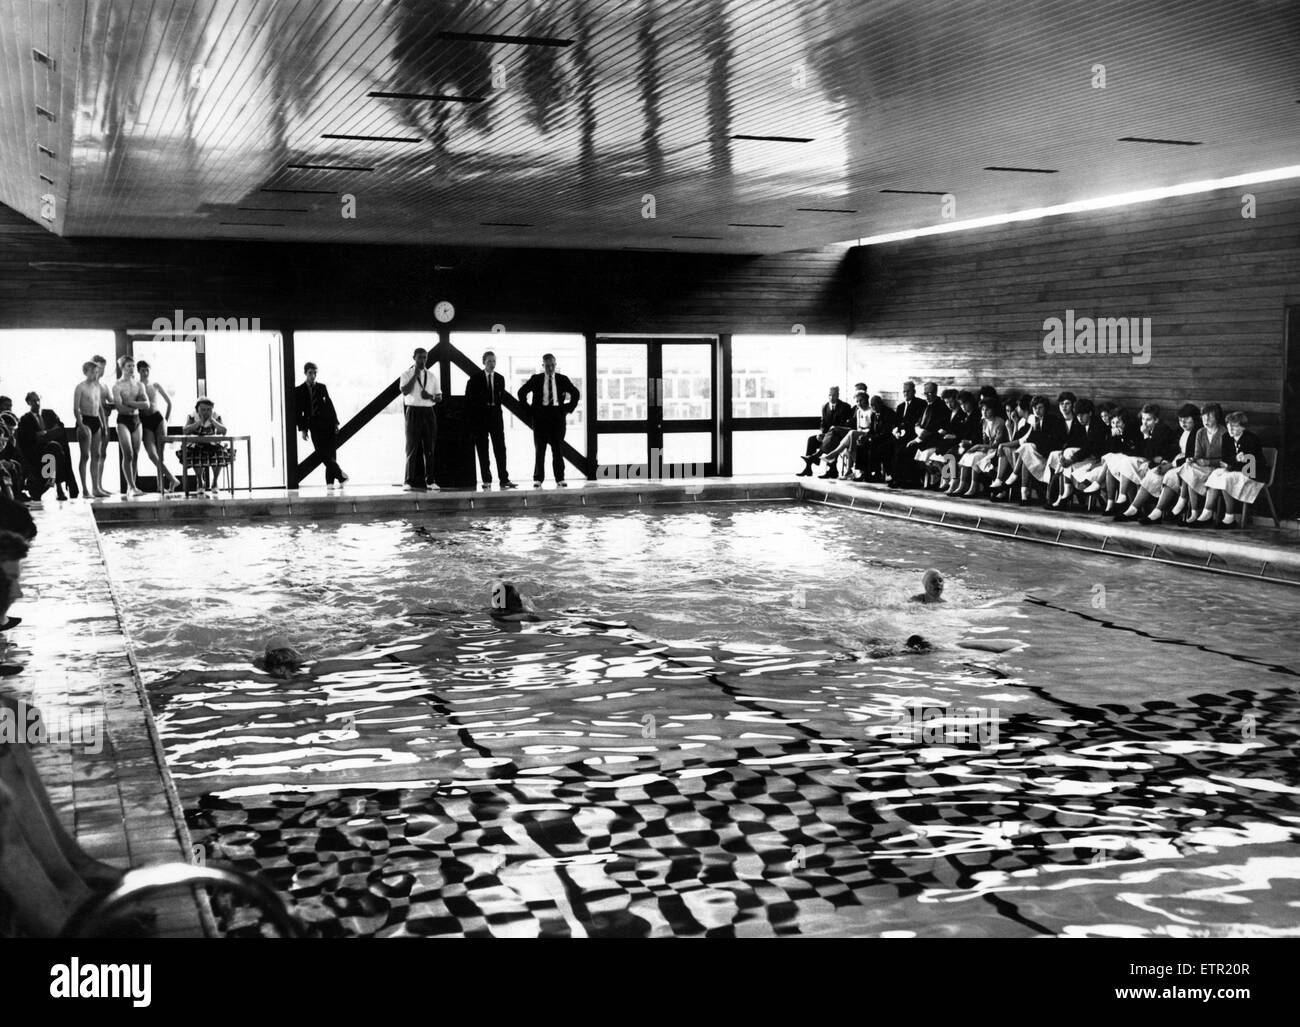 A race in progress in the new pool during the swimming gala that followed the opening of the swimming baths at Binley Park Comprehensive School. 26th June 1962. Stock Photo